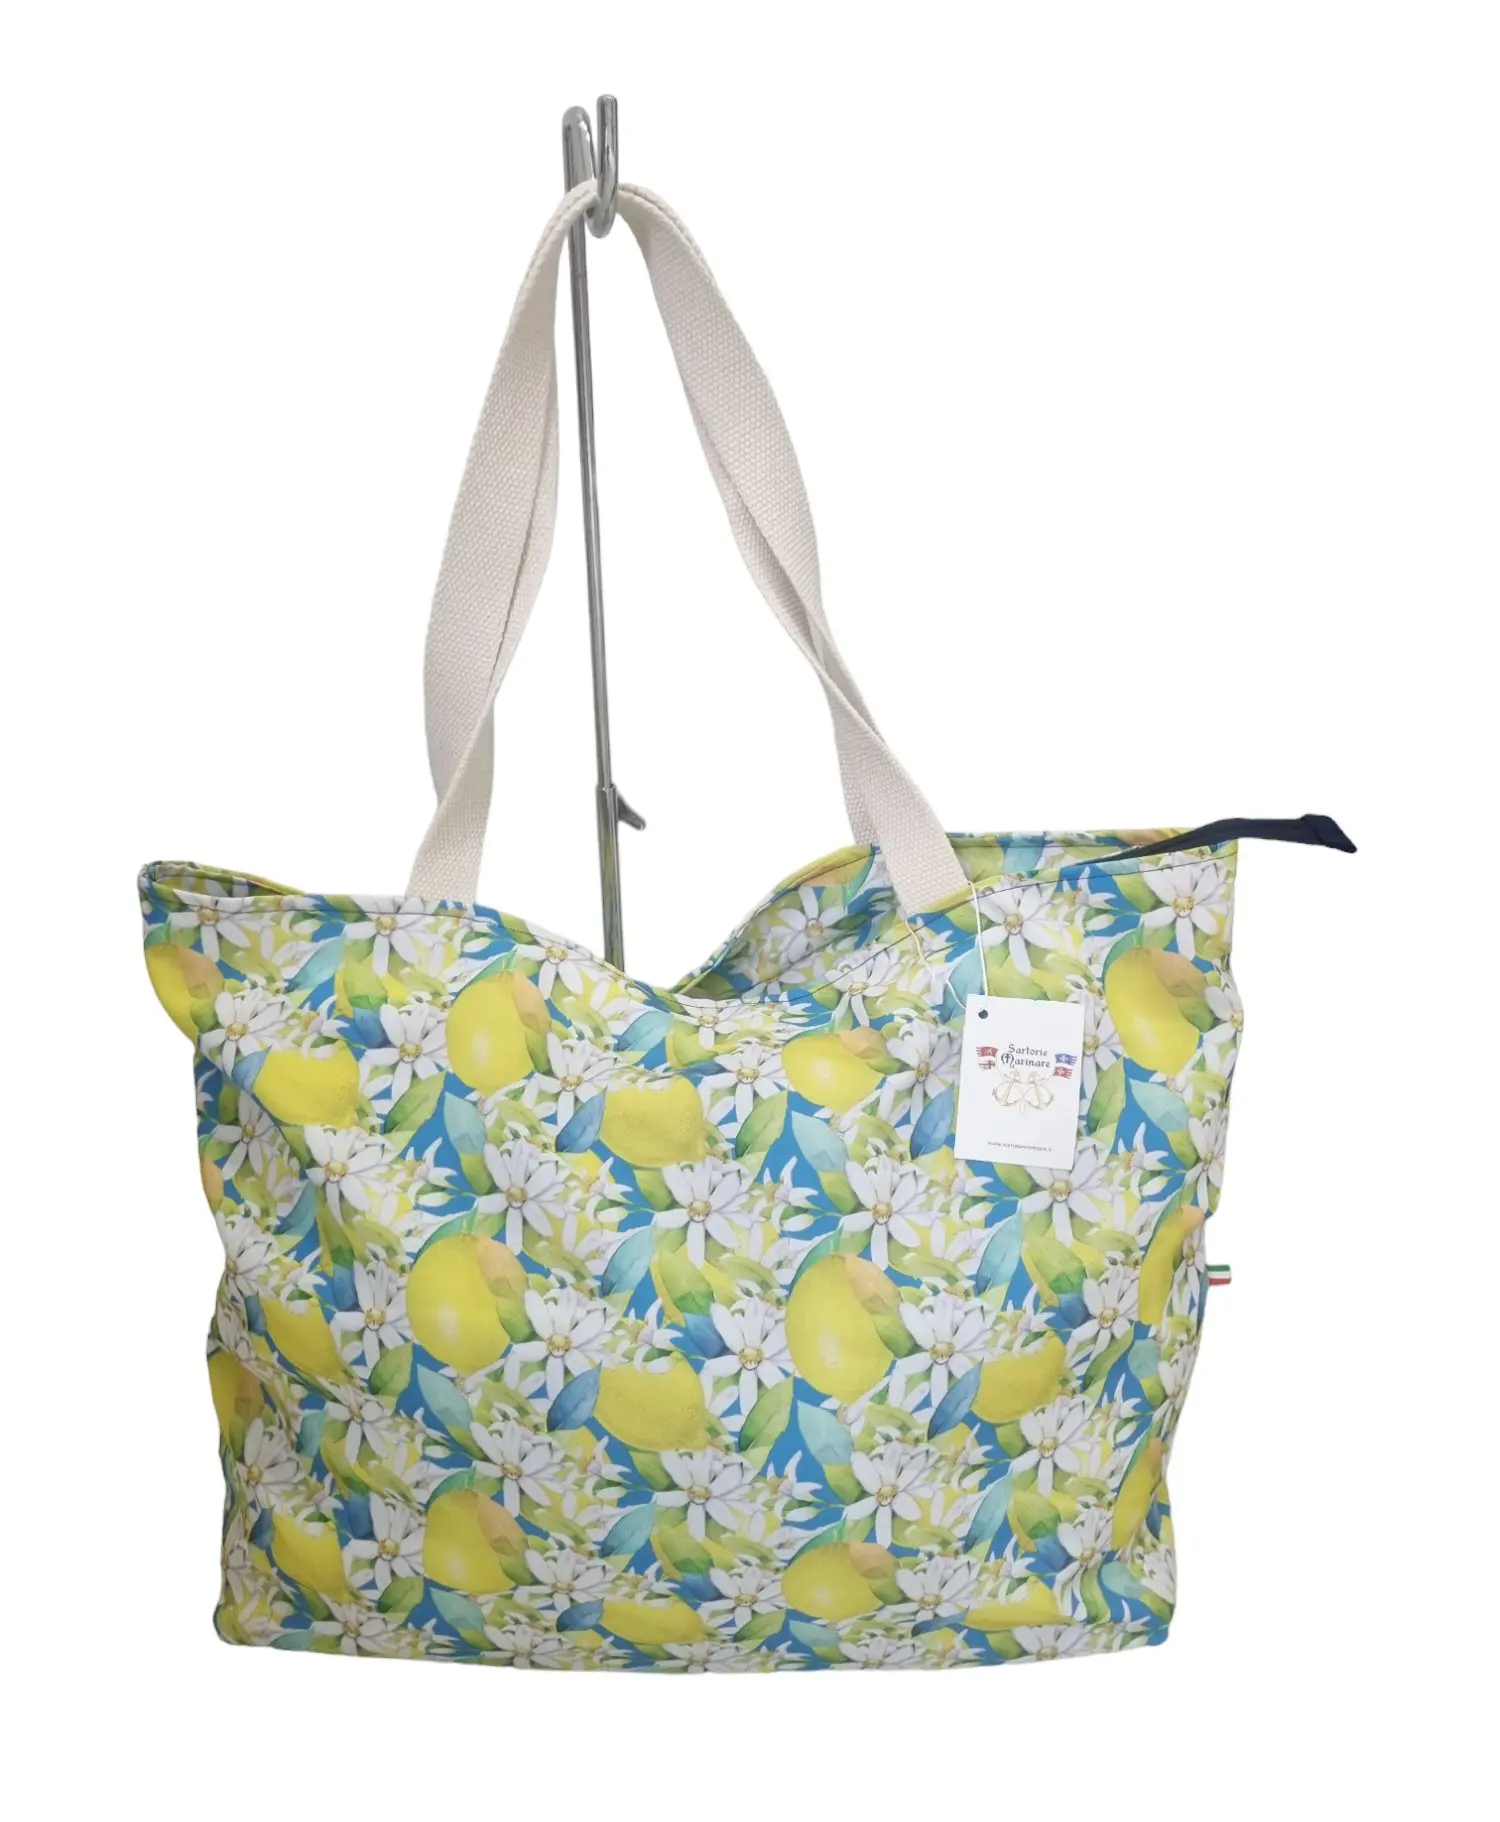 Large beach shopper bag in polyester with orange blossom pattern, handmade in Italy